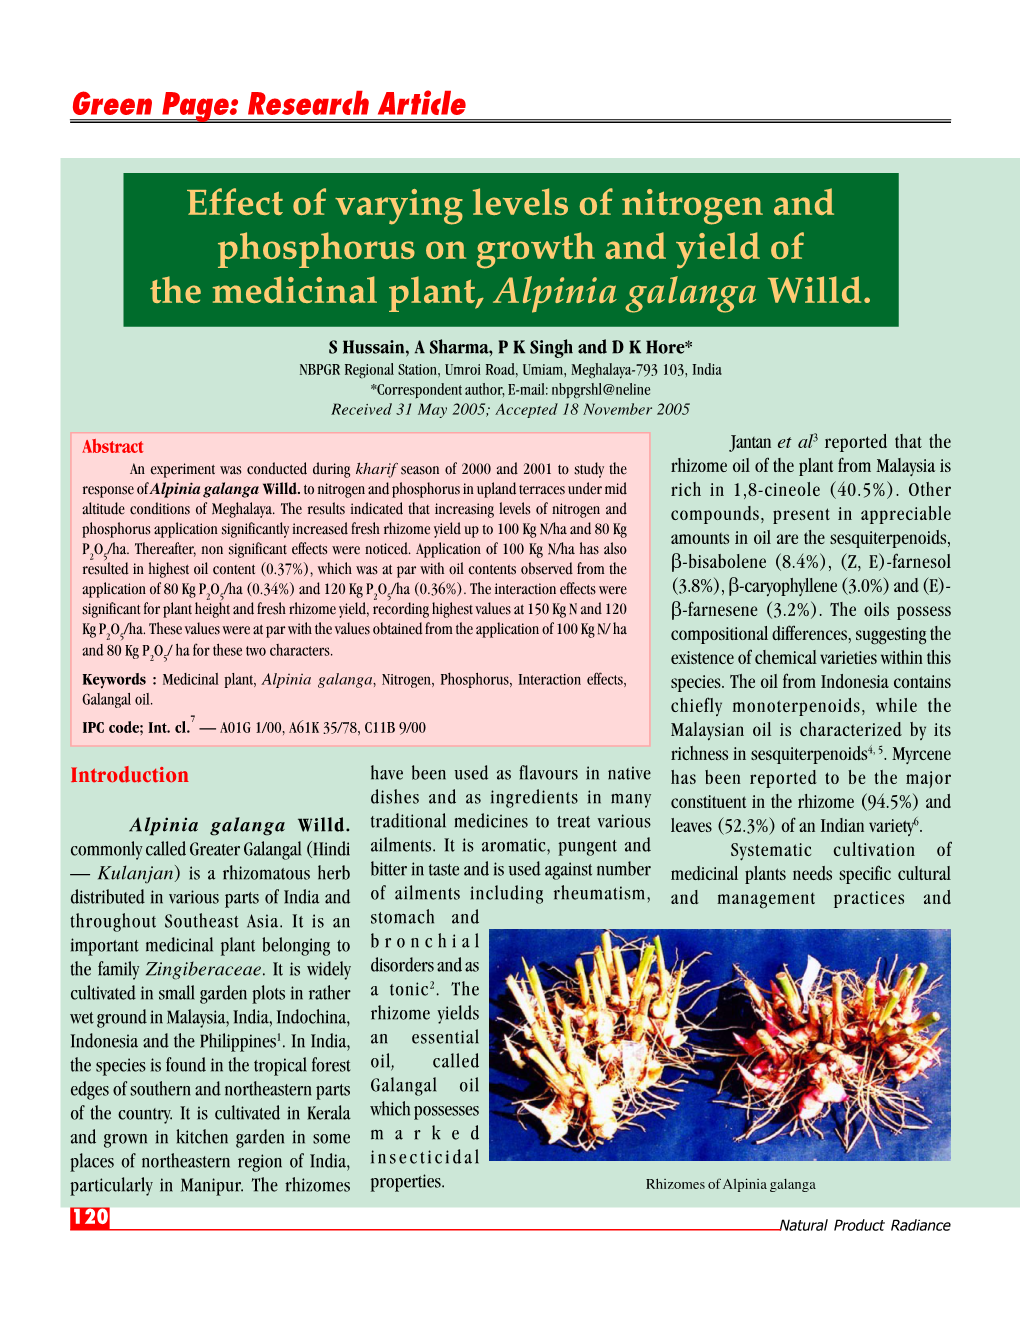 Effect of Varying Levels of Nitrogen and Phosphorus on Growth and Yield of the Medicinal Plant, Alpinia Galanga Willd